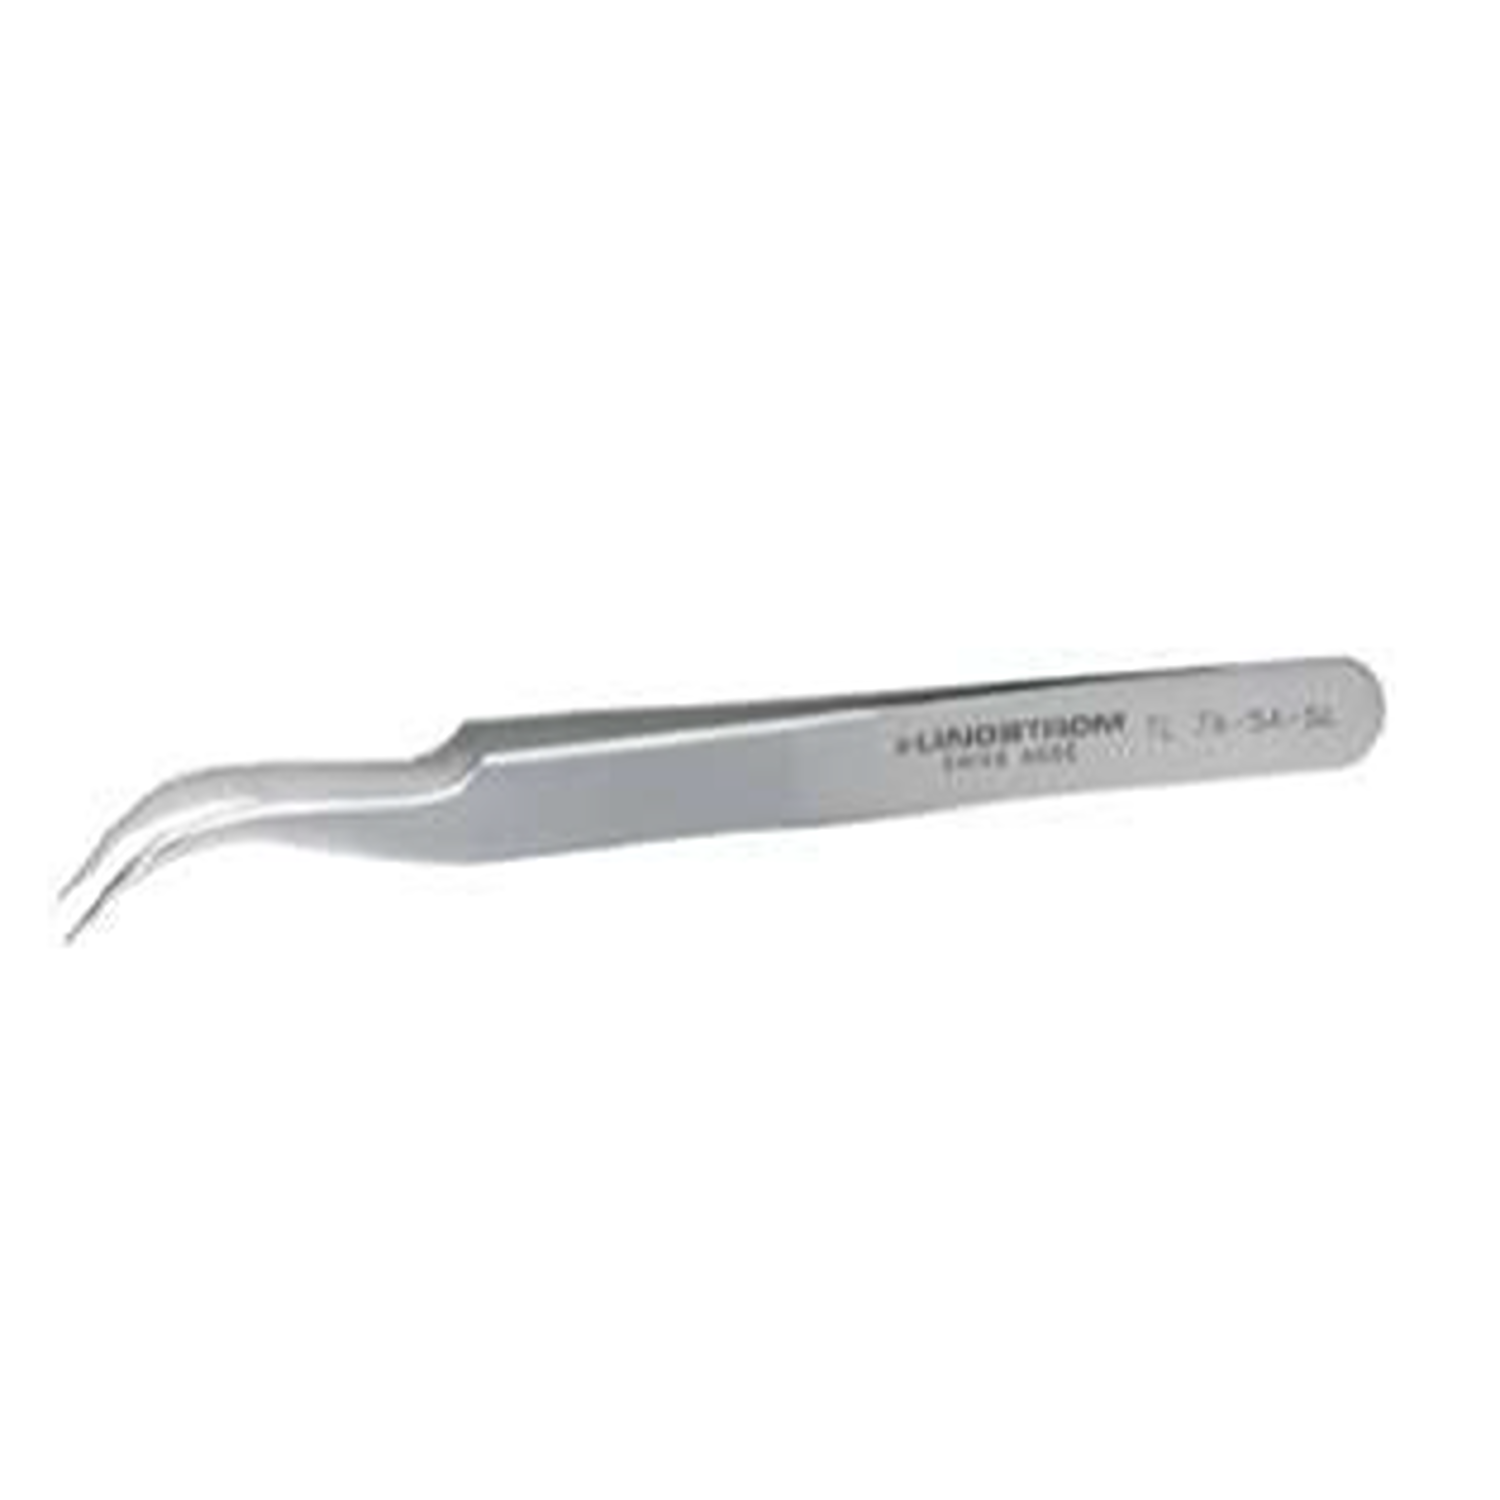 BAHCO TL 7A-SA-SL Stainless Steel Precision Industrial Tweezers - Premium Tweezers from BAHCO - Shop now at Yew Aik.